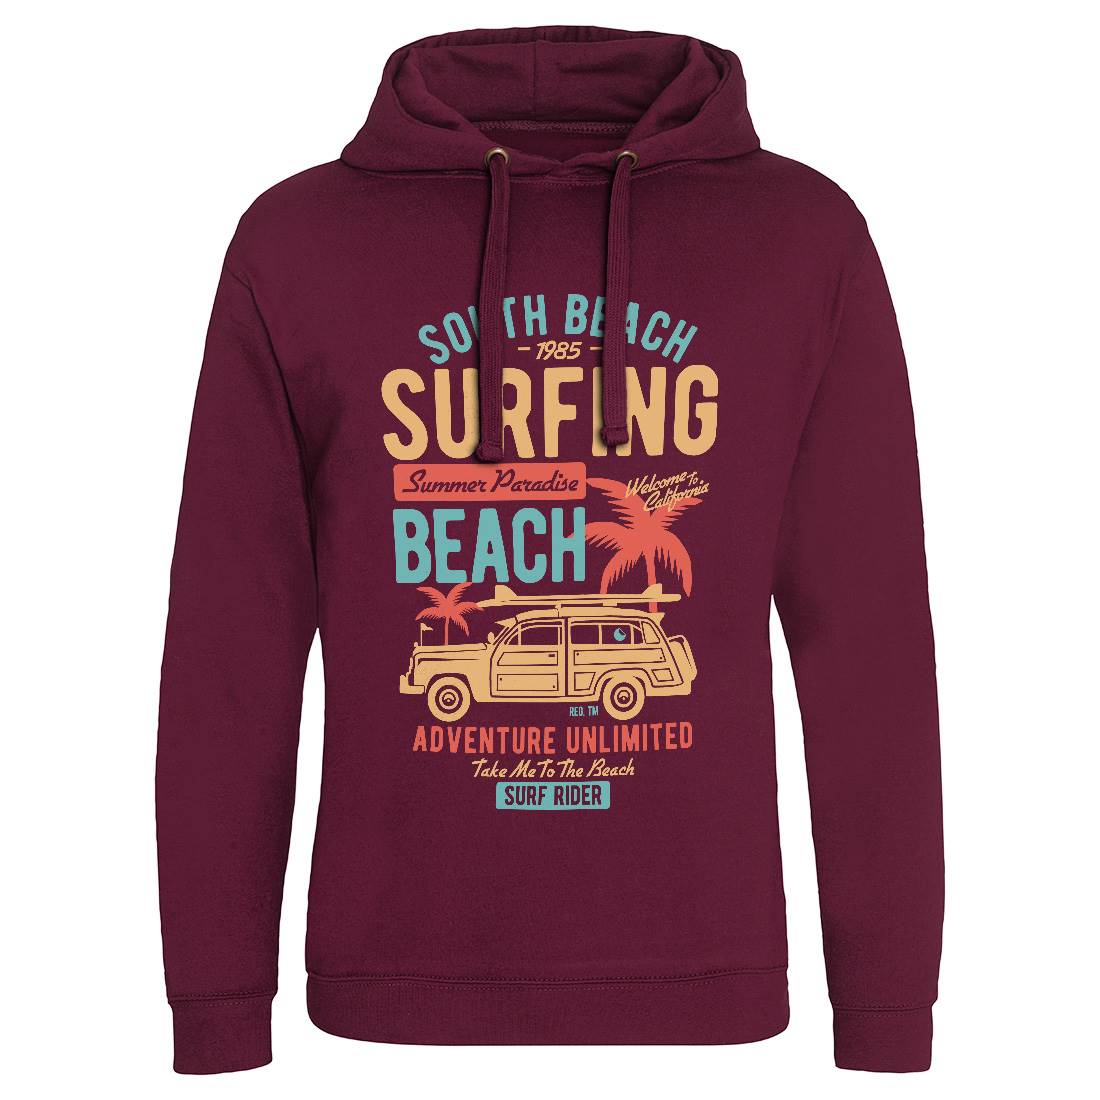 South Mens Hoodie Without Pocket Surf B448